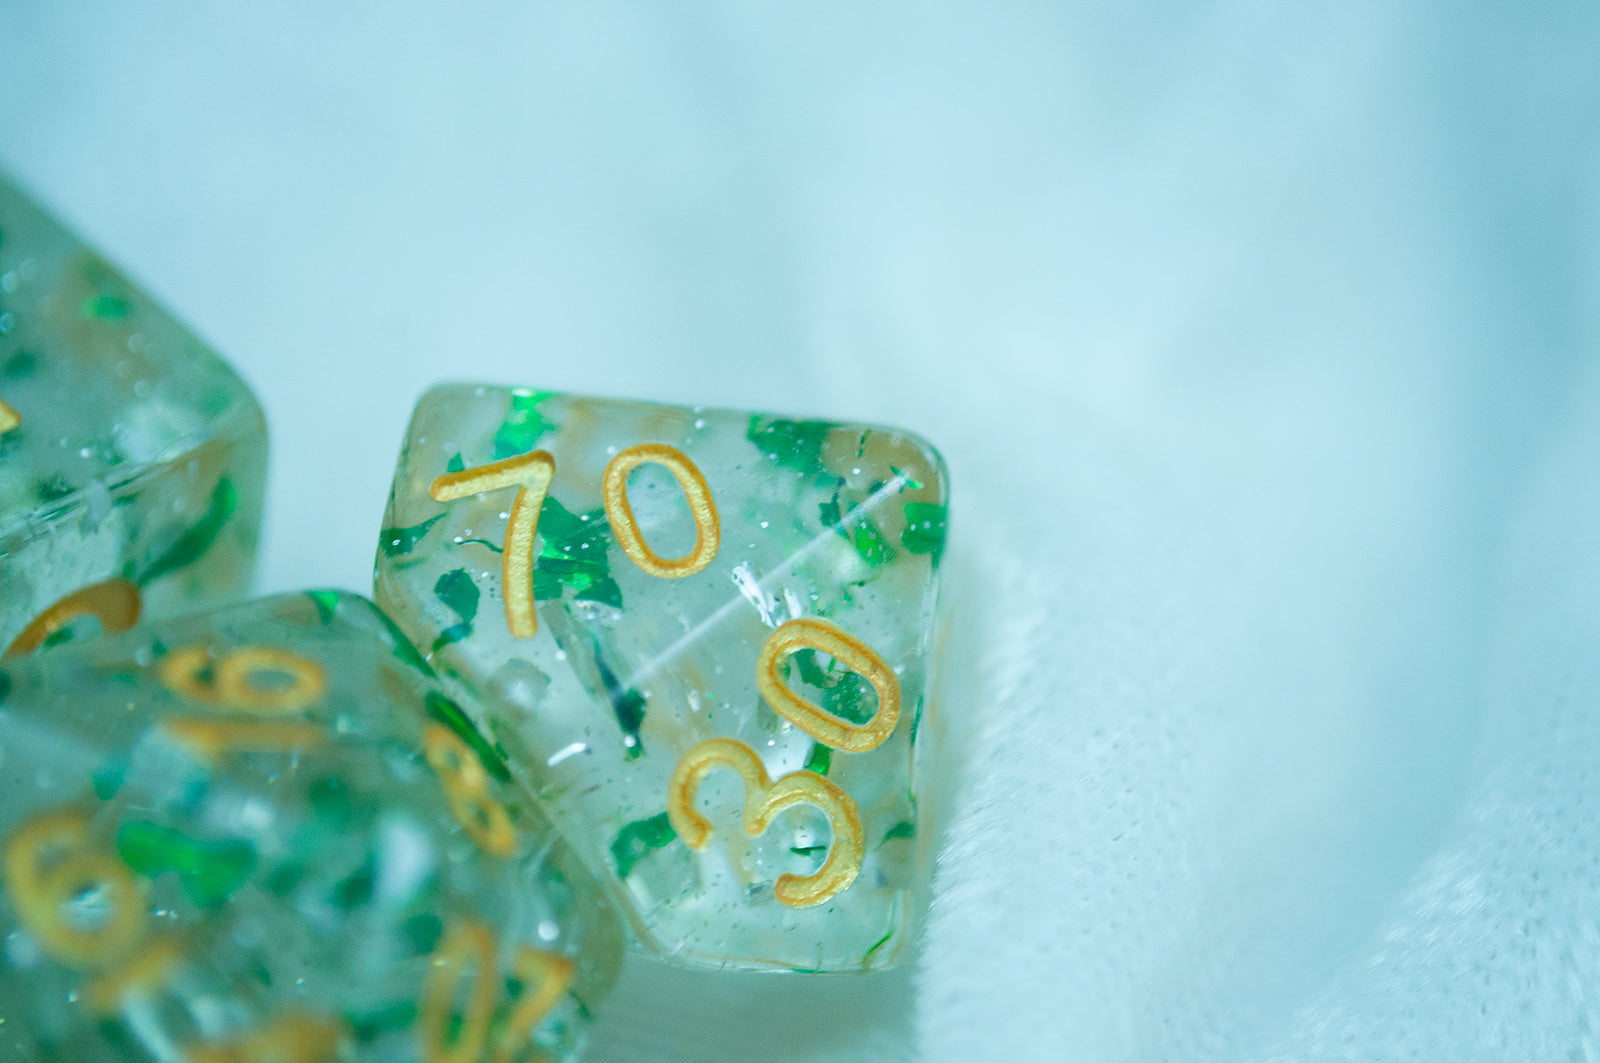 A close up of the Metallic Emerald 7 piece dice set from Tabletop Loot with green metallic flakes suspended in clear resin with glitter and gold numbering.